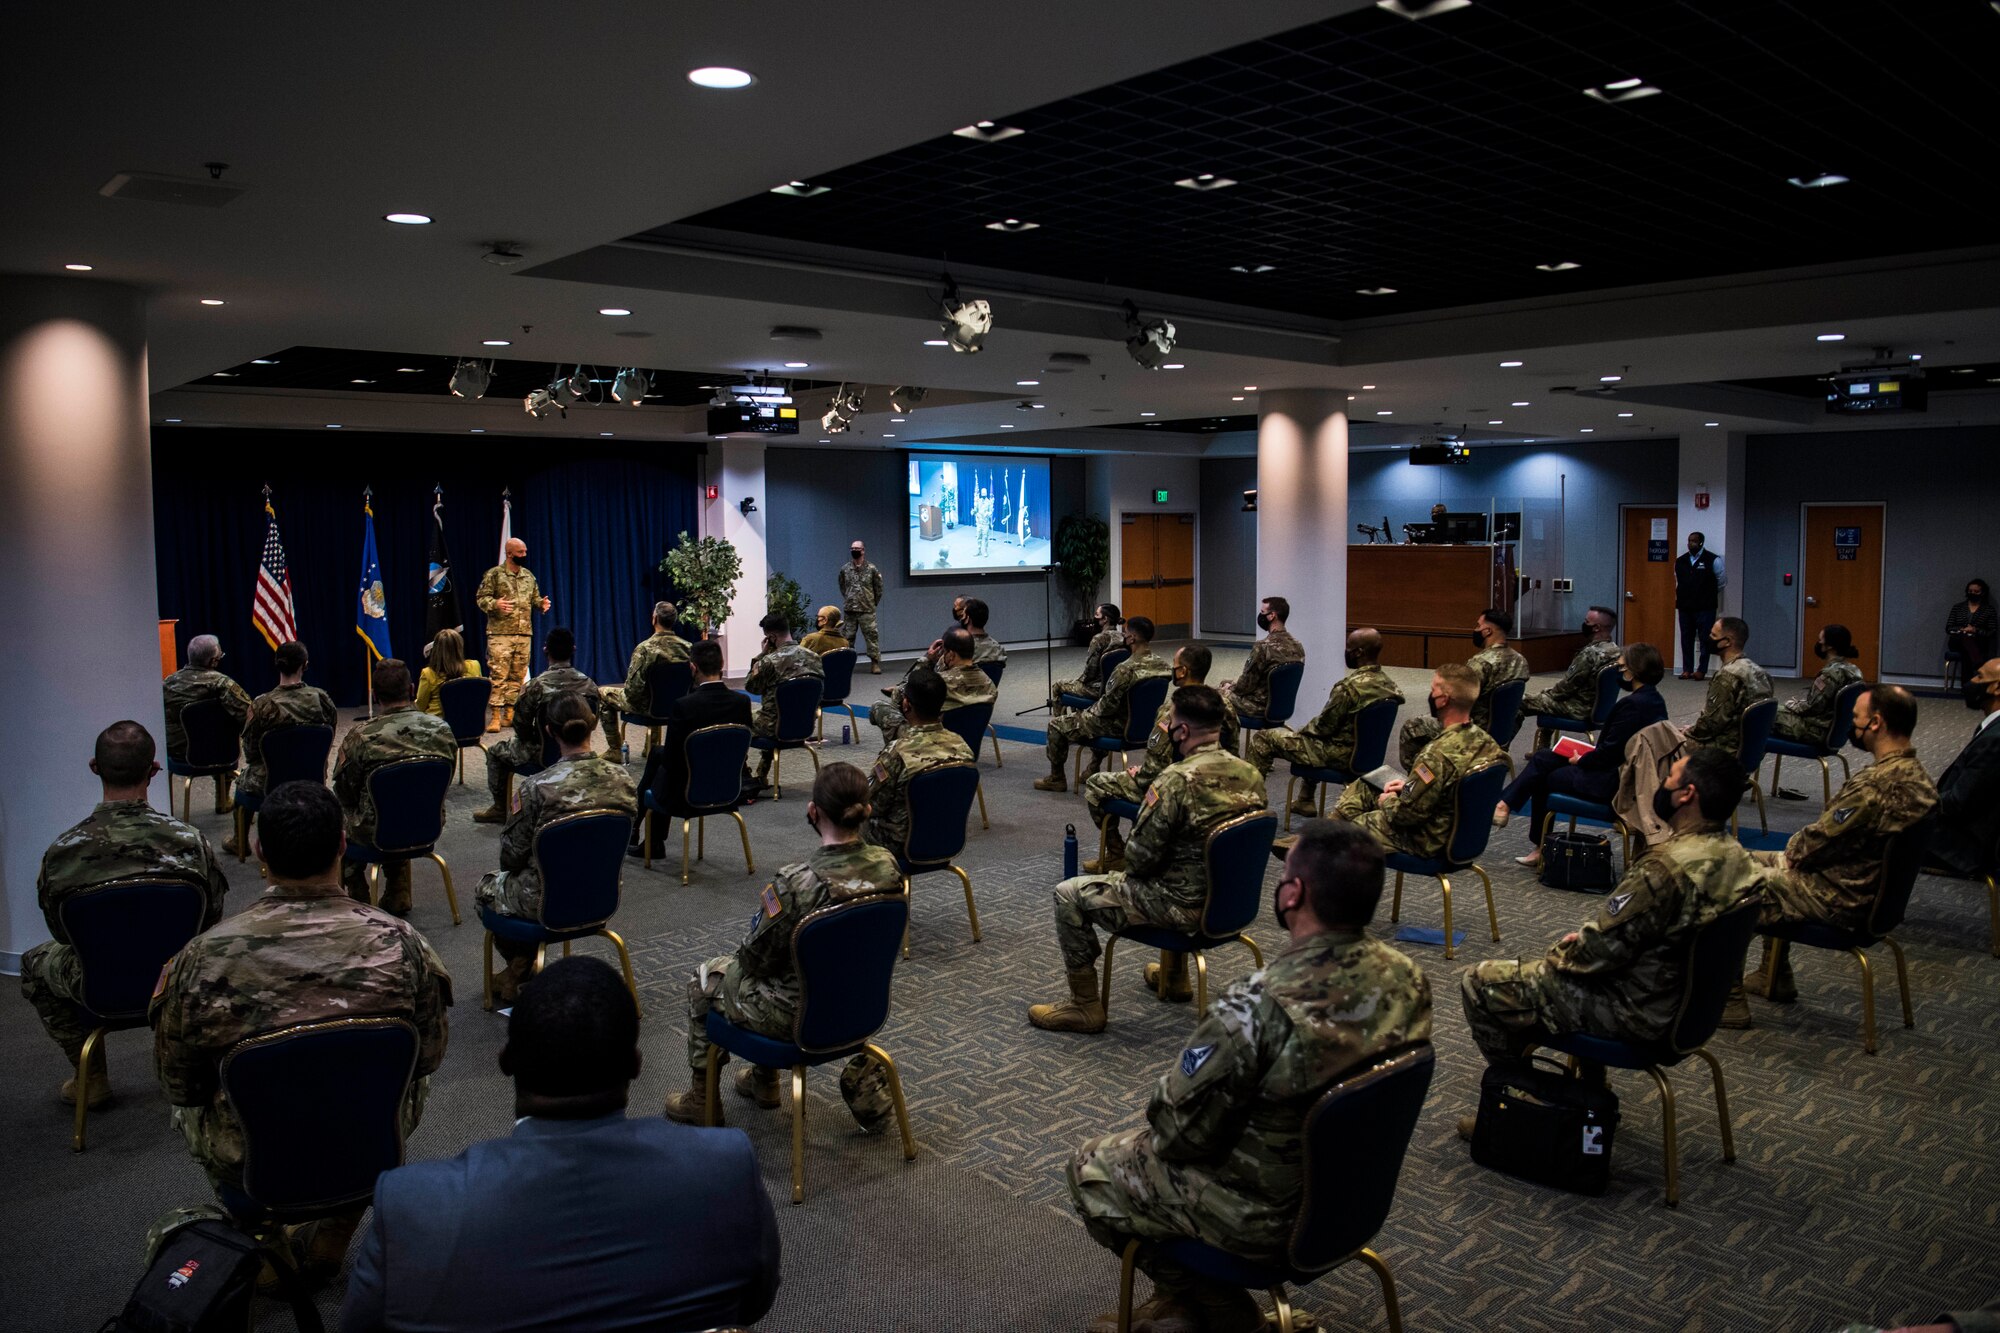 Attendees of an all call led by U.S. Space Force Gen. John W. “Jay” Raymond, Chief of Space Operations, and Chief Master Sergeant of the Space Force Roger A. Towberman, listen in as Raymond speaks in the Gordon Conference Center at Los Angeles Air Force Base, California, April 8, 2021. In-person and virtual attendees were briefed on topics including diversity and inclusion, integrating the Space Force, and the planned organizational structure of the Space Systems Command scheduled to activate this summer.  (U.S. Space Force photo by Staff Sgt. Luke Kitterman)